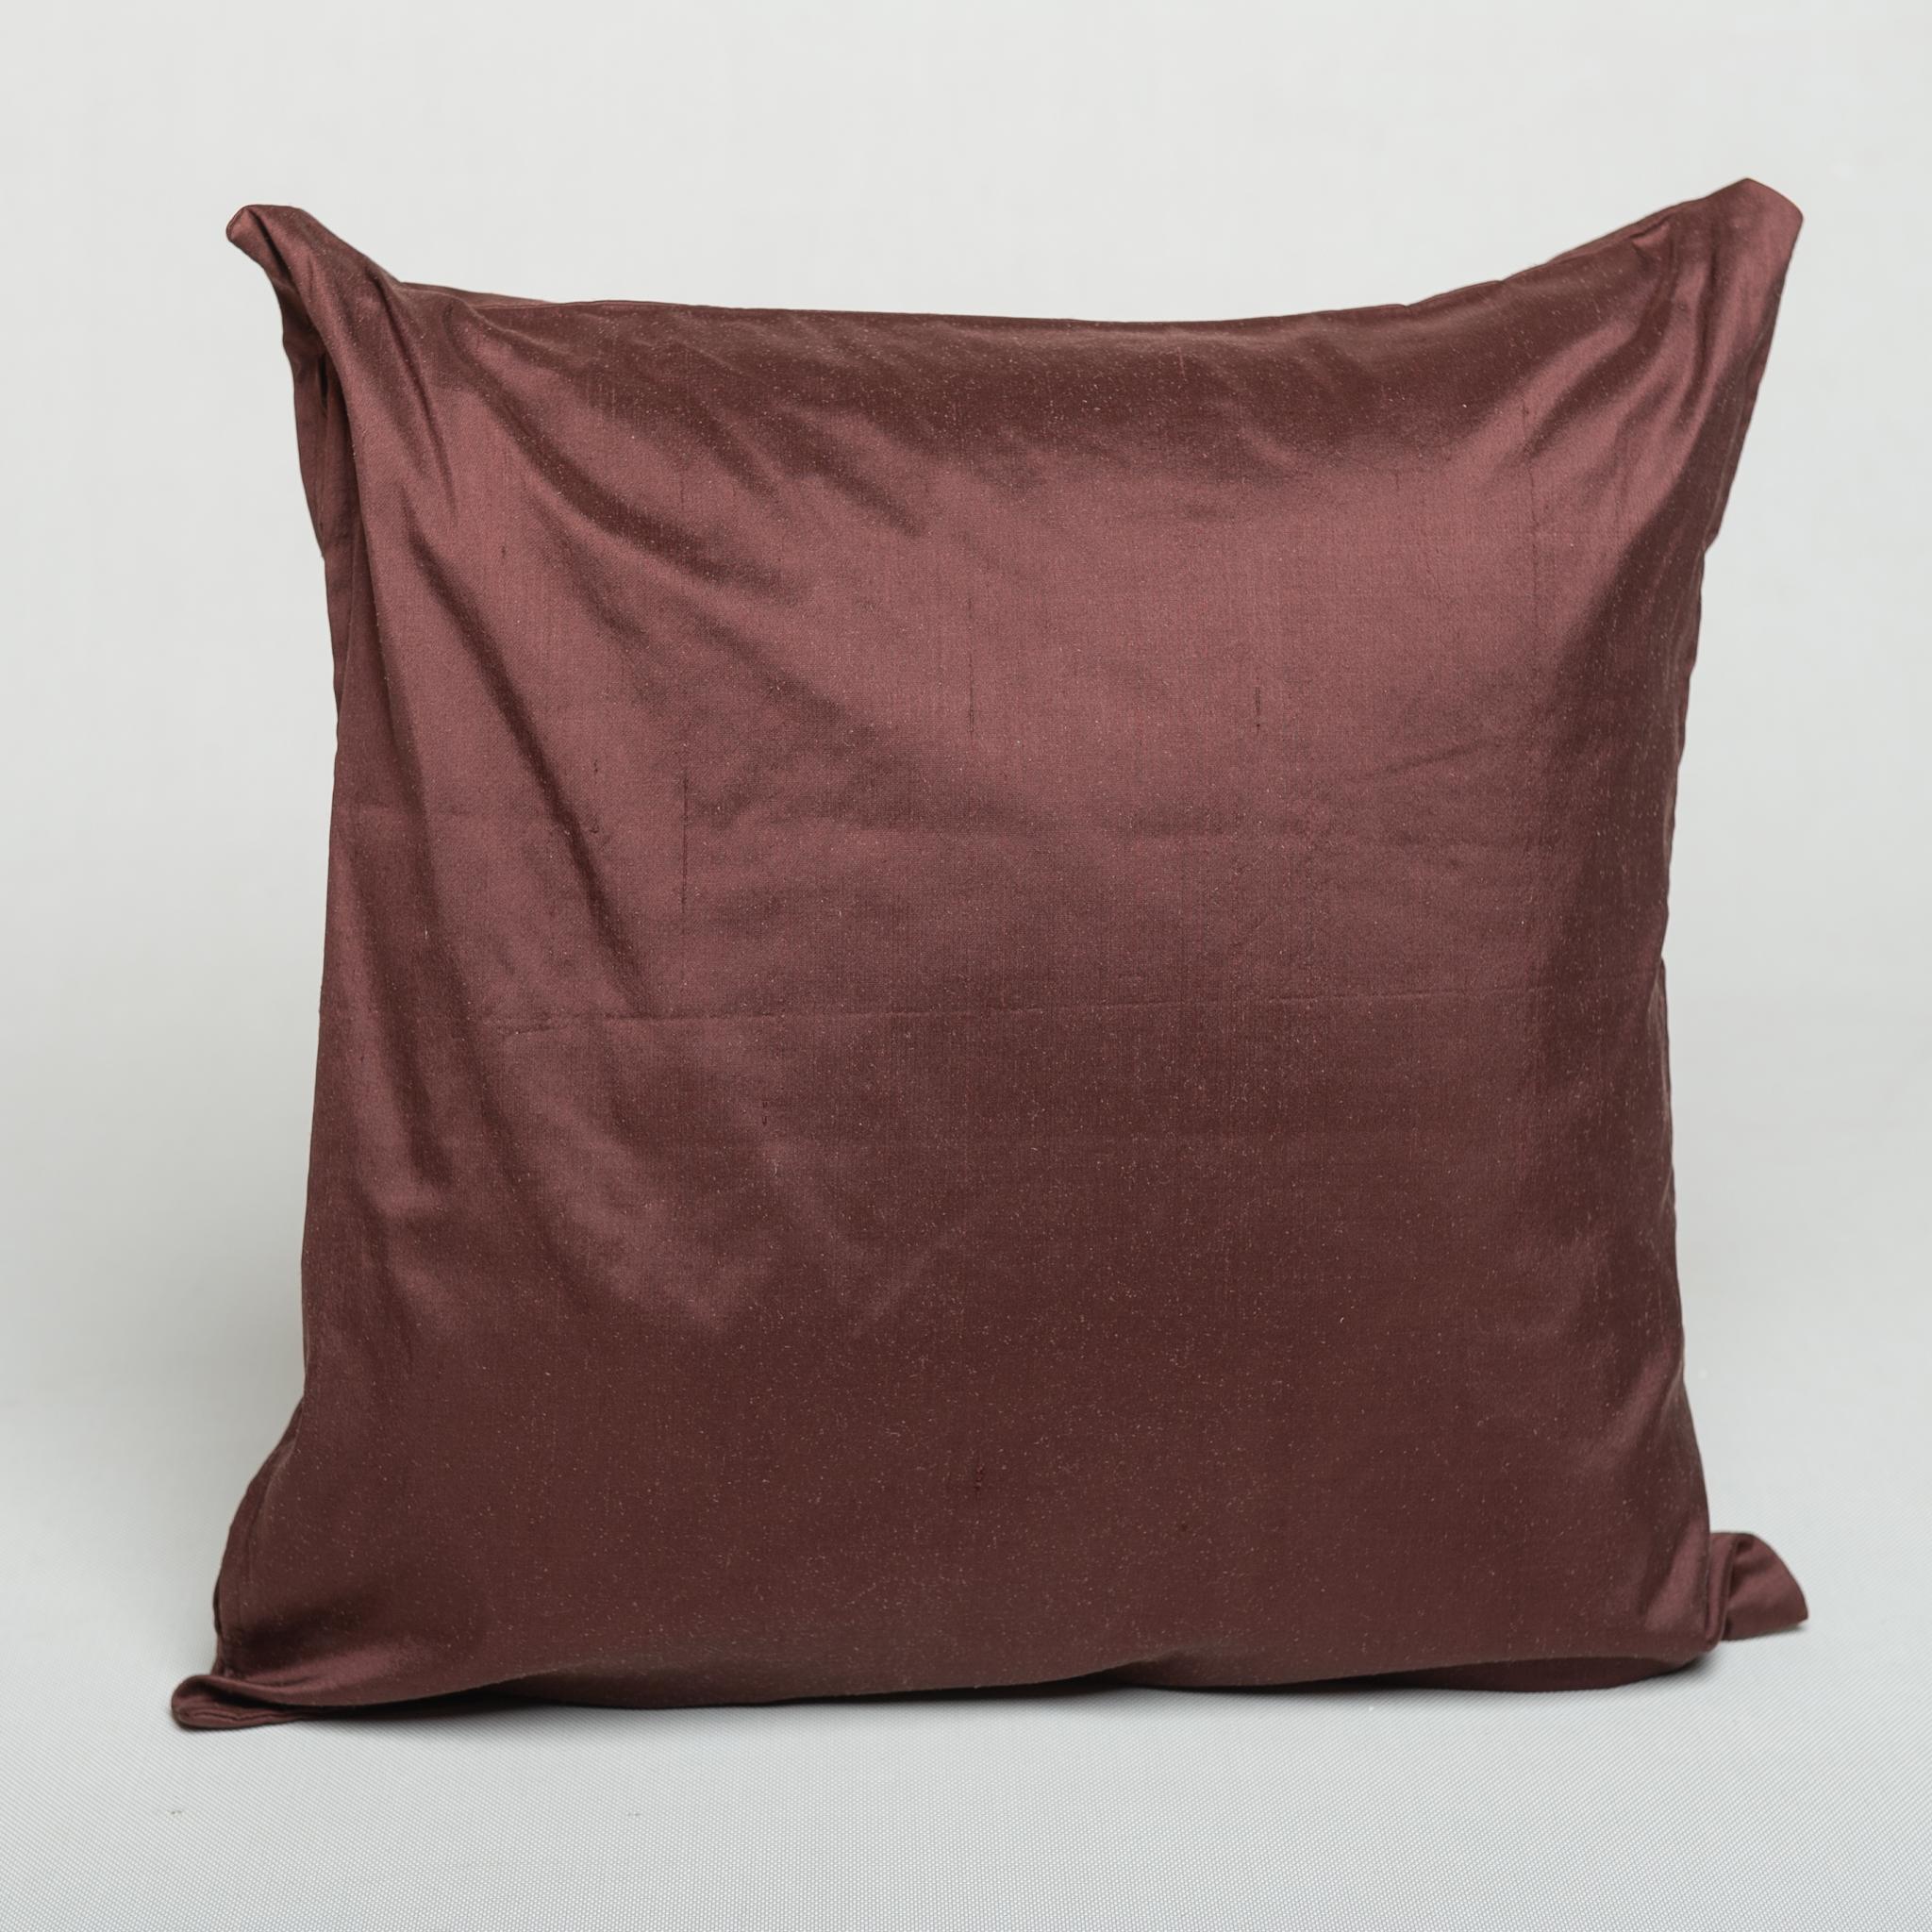 Brown silk cushion with hand embroidery in silk threads: modern or classic, but beautiful!.
(I forgot designer 's name..)